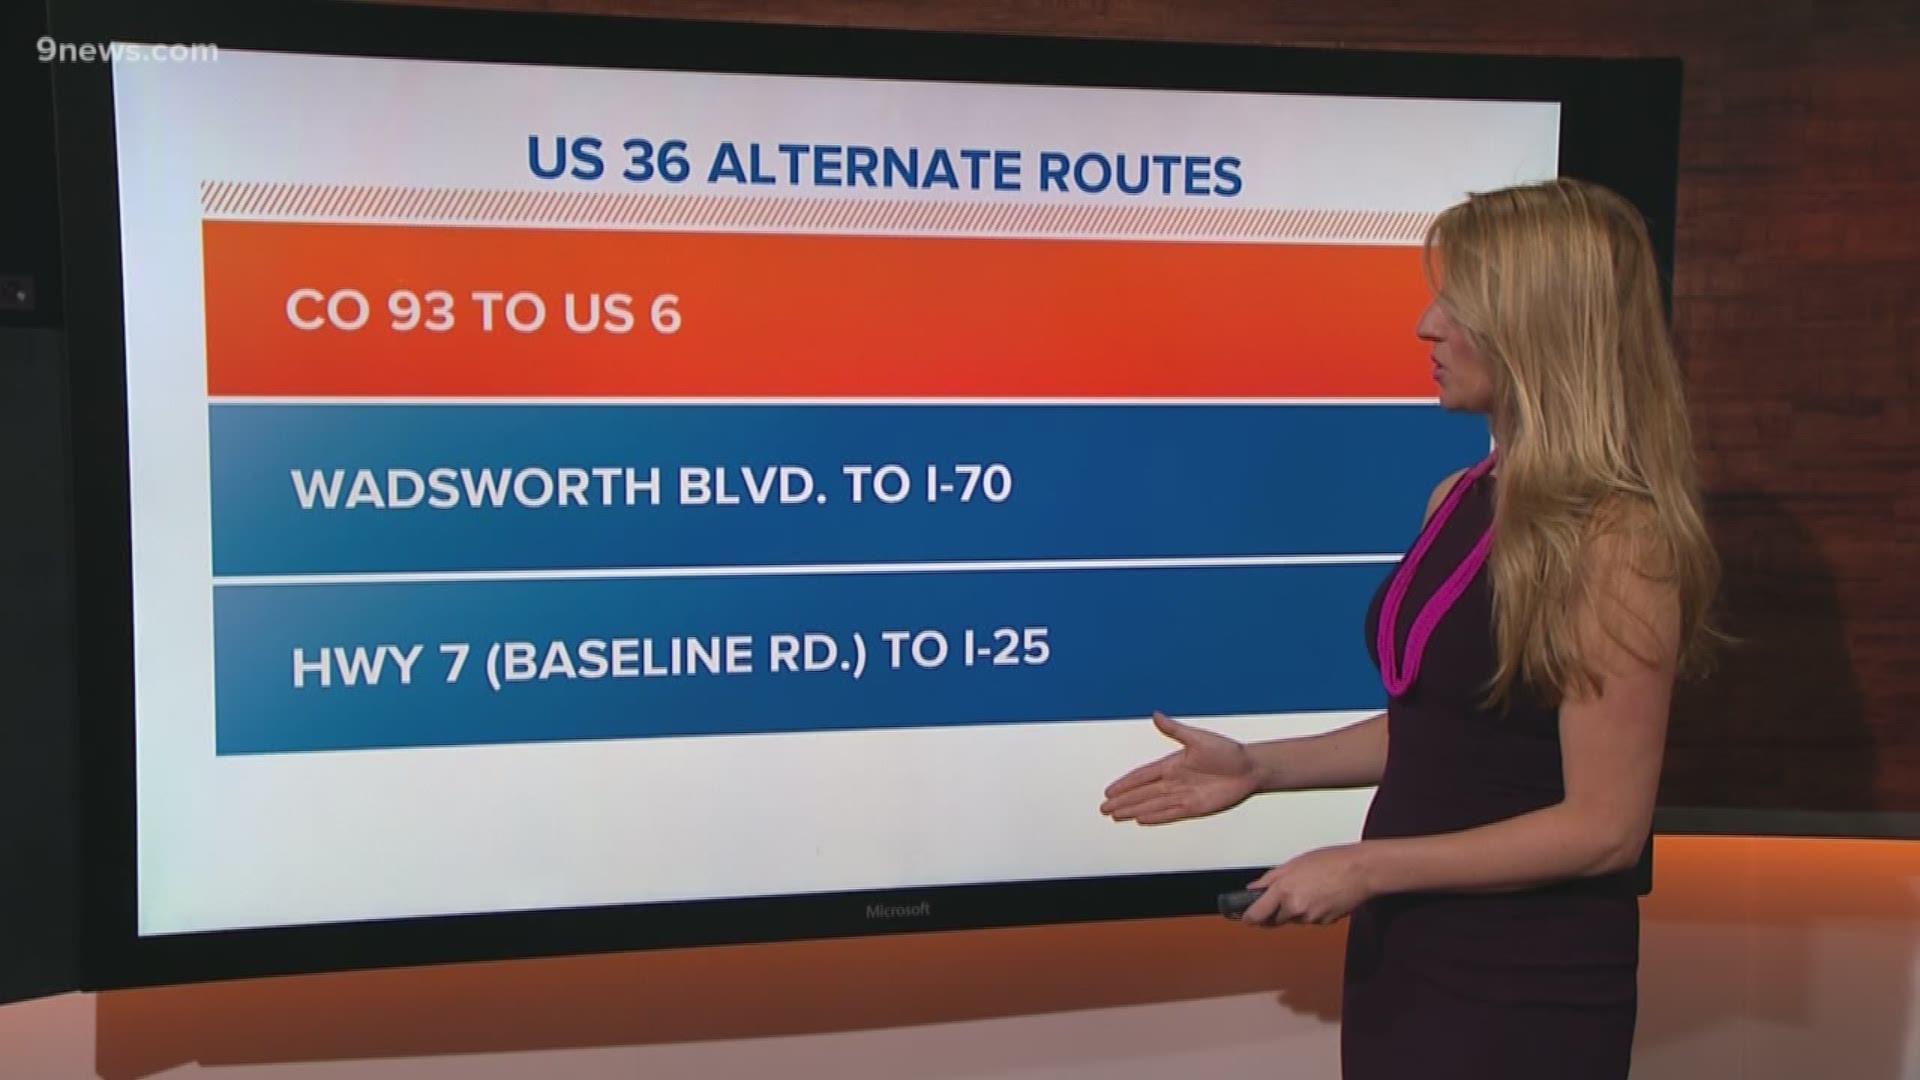 EB US 36 remains closed after a large crack formed across the traffic lanes on Friday. Amelia Earhart goes over some of the detours to get you around it while repairs are made.